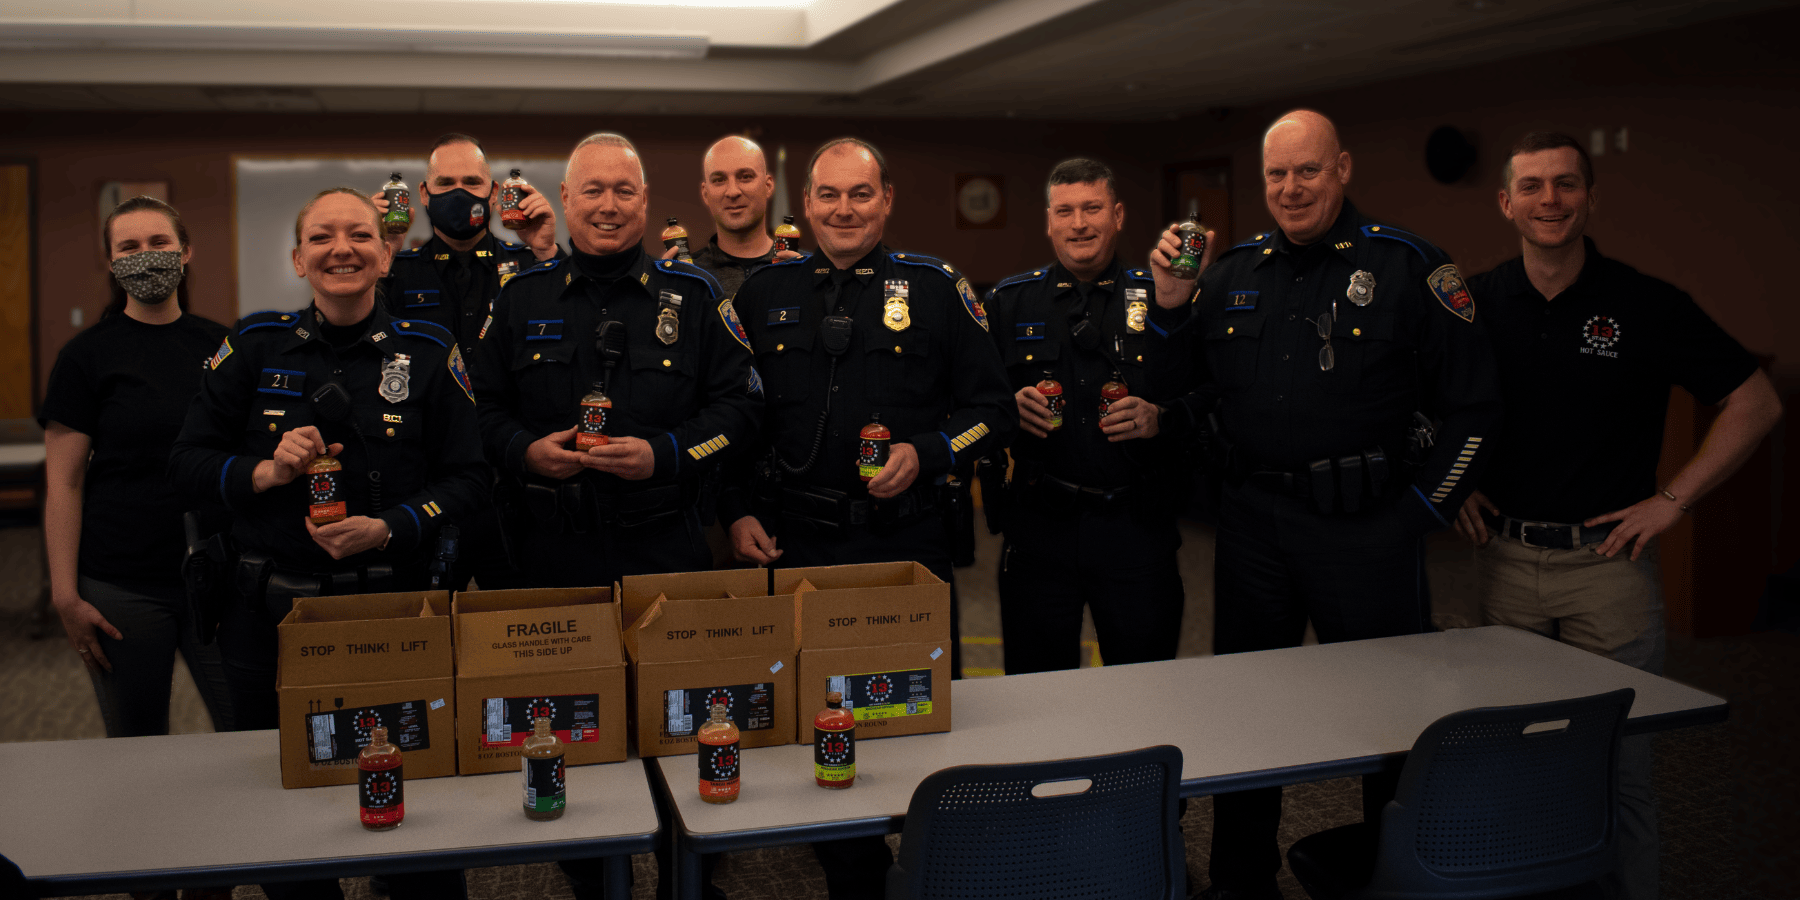 Members of a police department smiling and holding up bottles of 13 Stars Hot Sauce